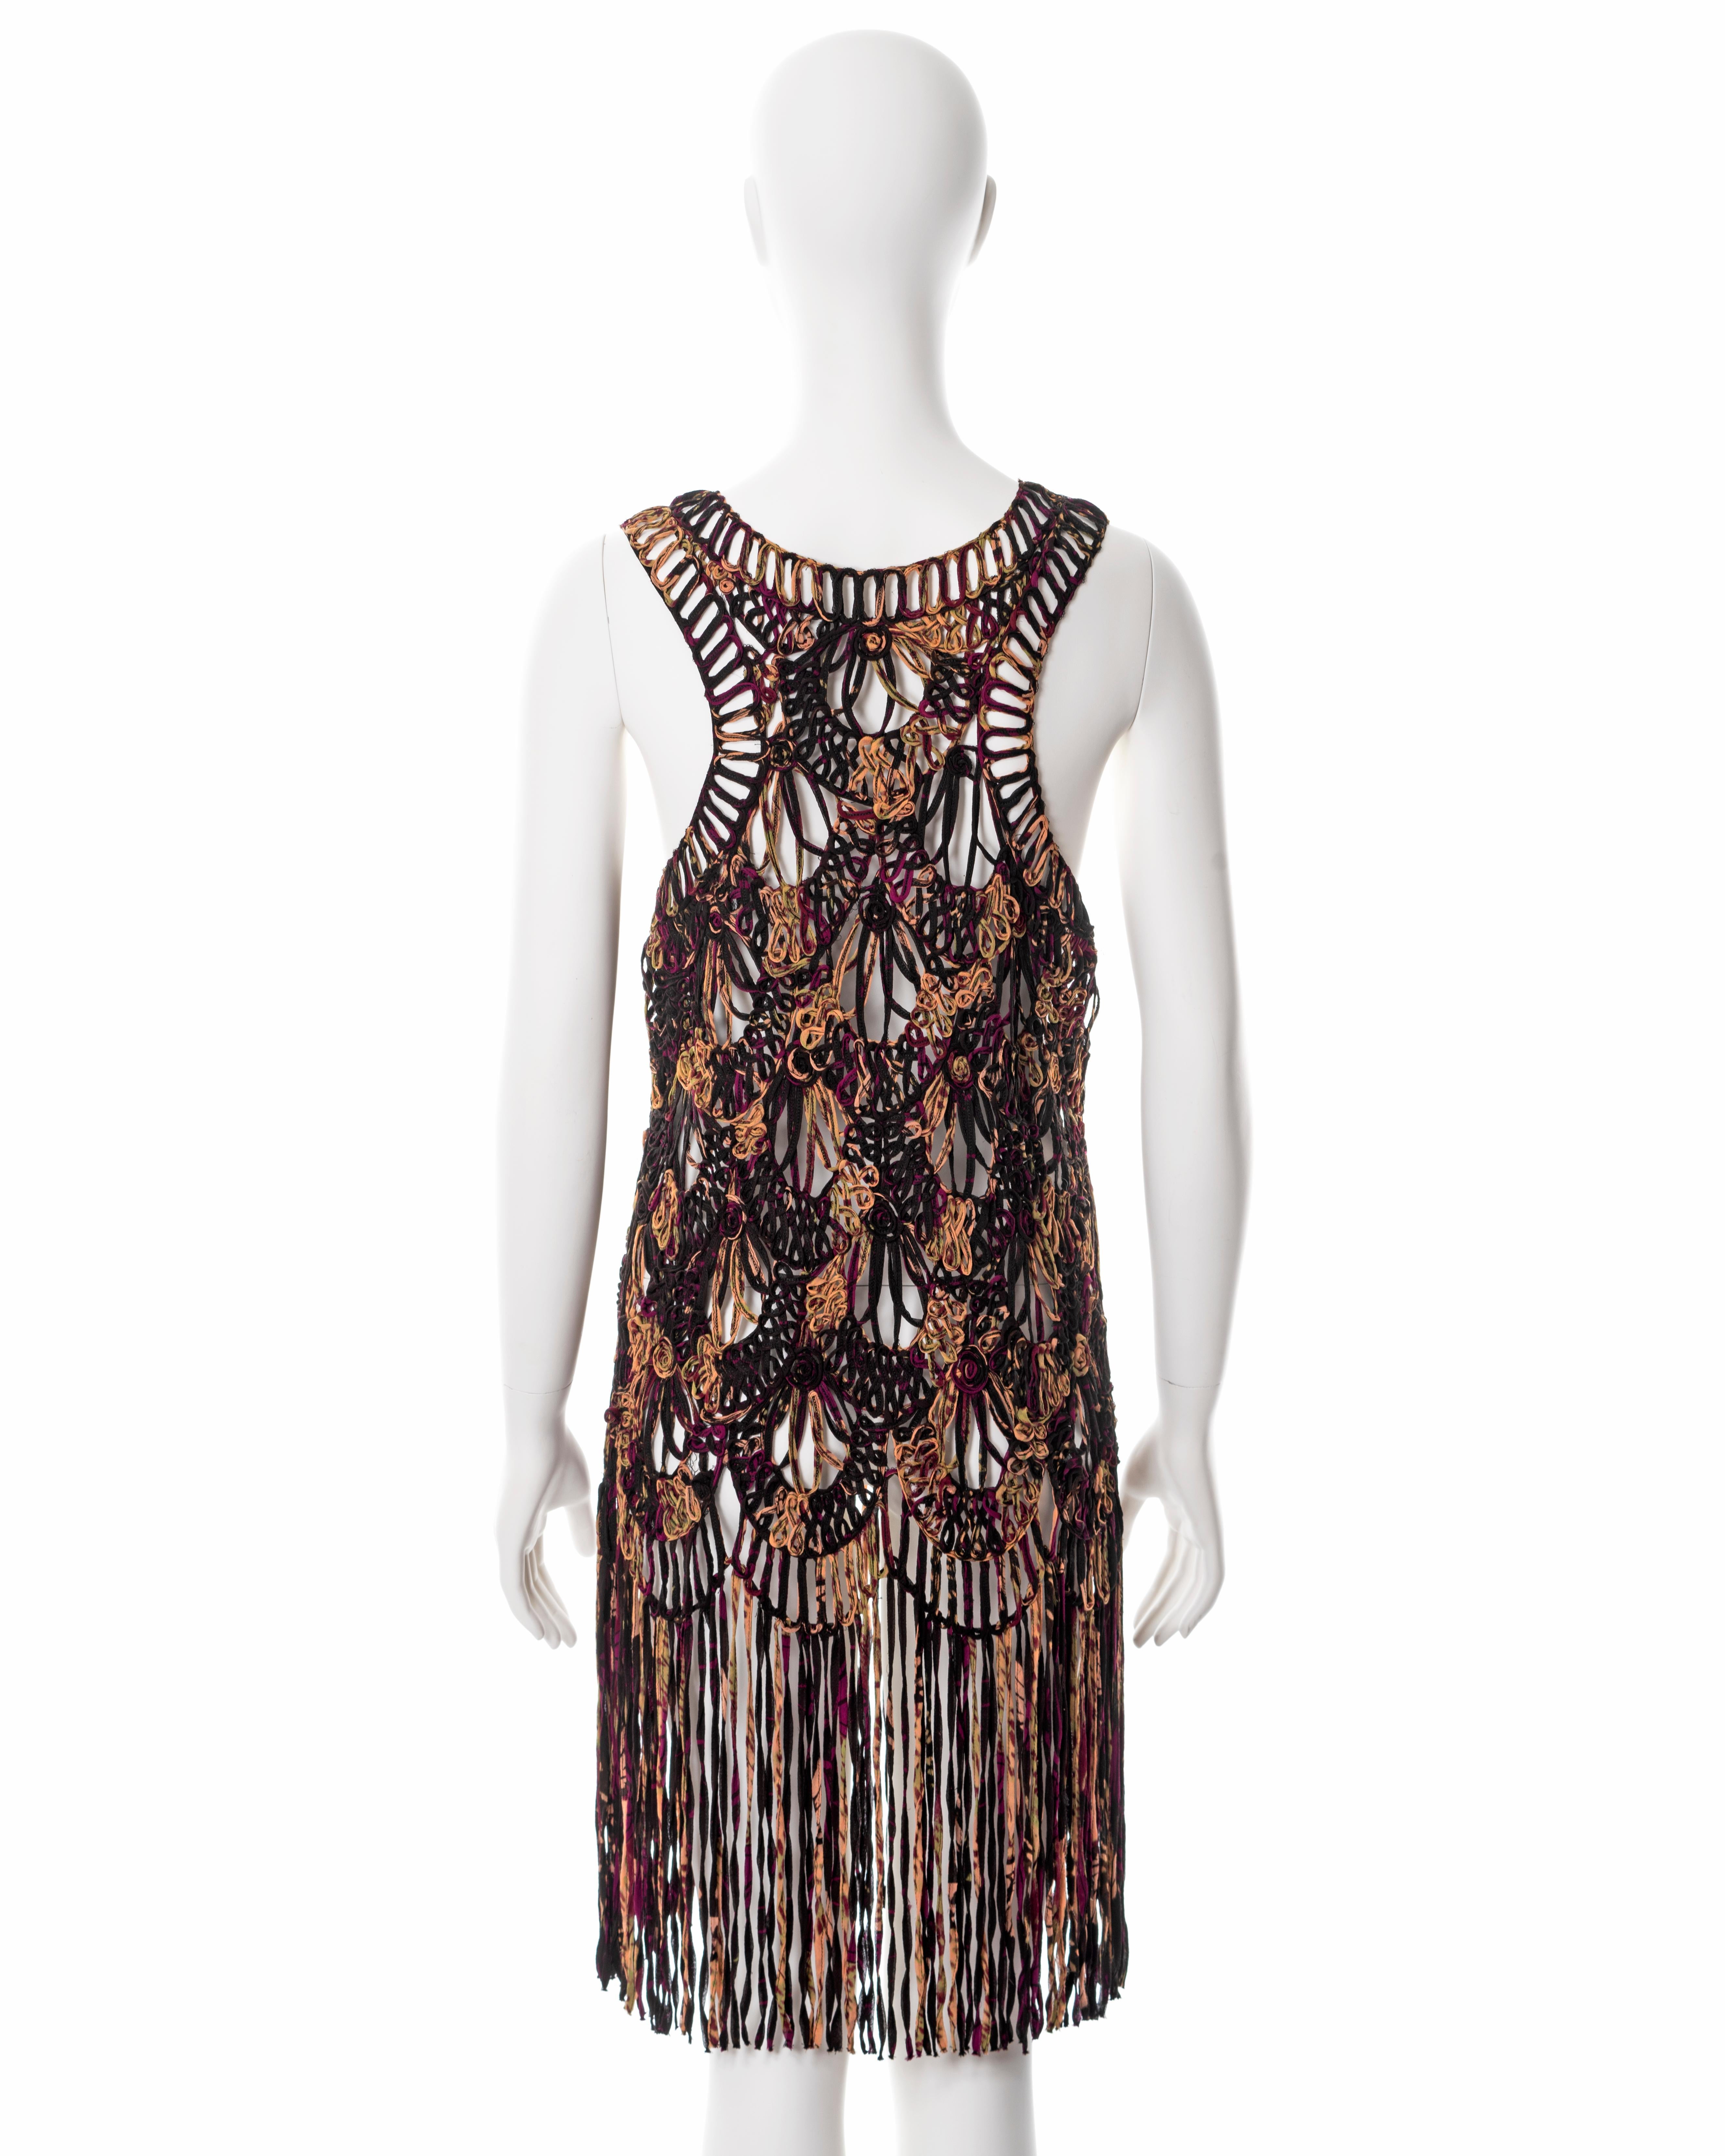 Jean Paul Gaultier fringed silk macramé dress, ss 2000 In Excellent Condition For Sale In London, GB